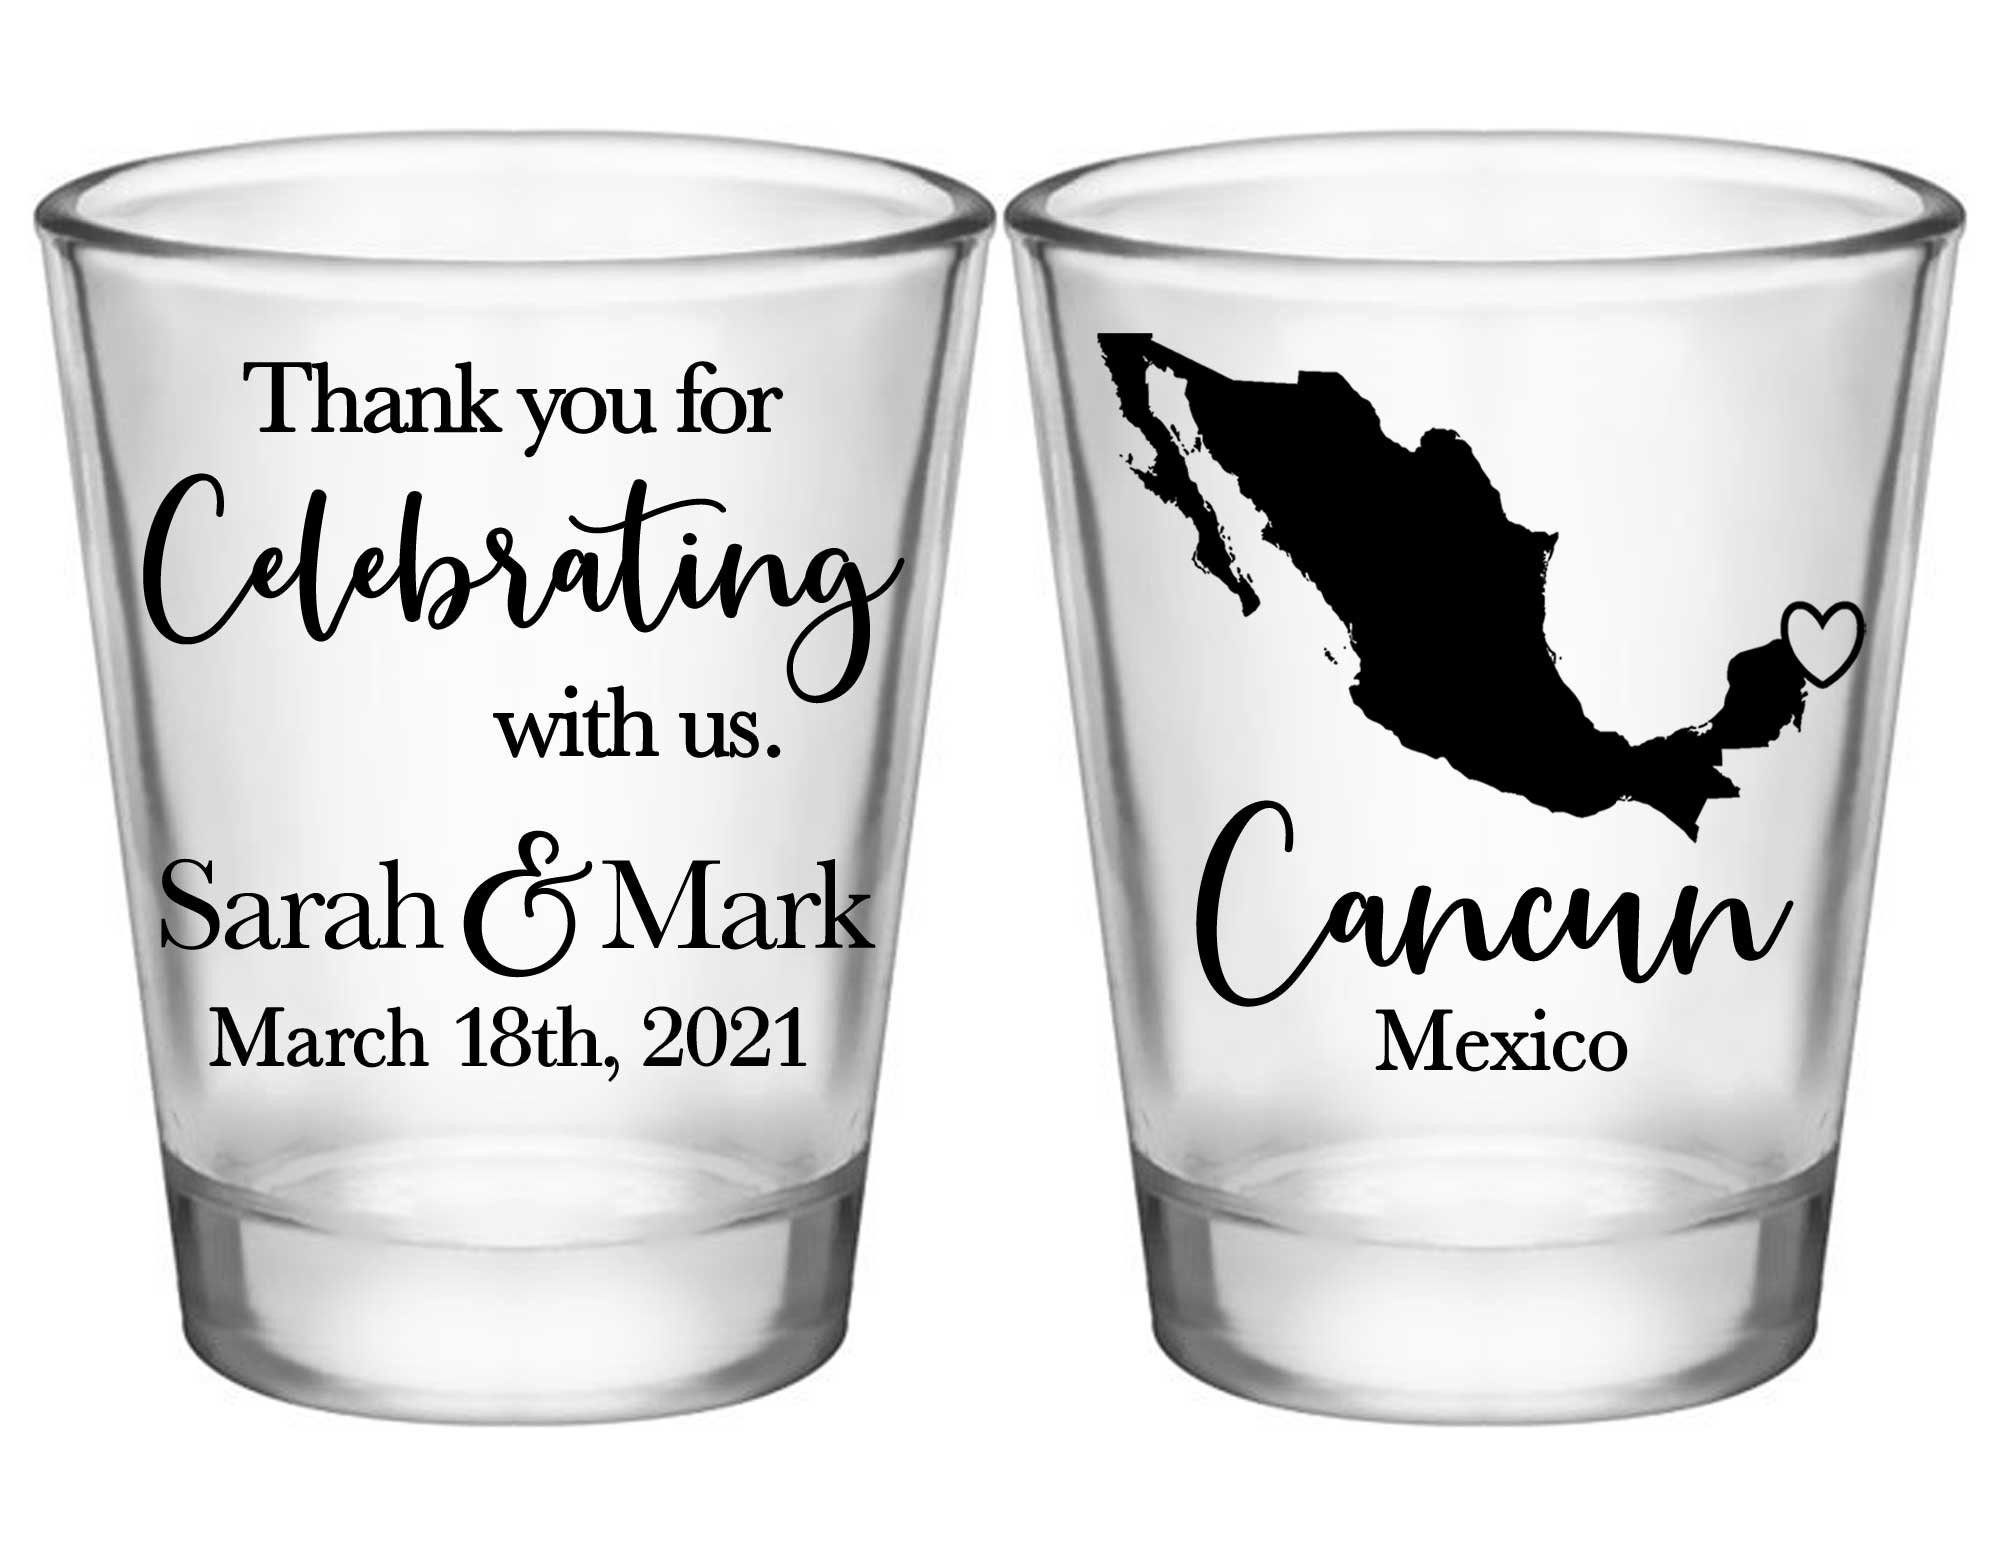 Wedding Shot Glasses Personalized Favors With Map Thank You Gift For Guests Clear Celebrating 1B2